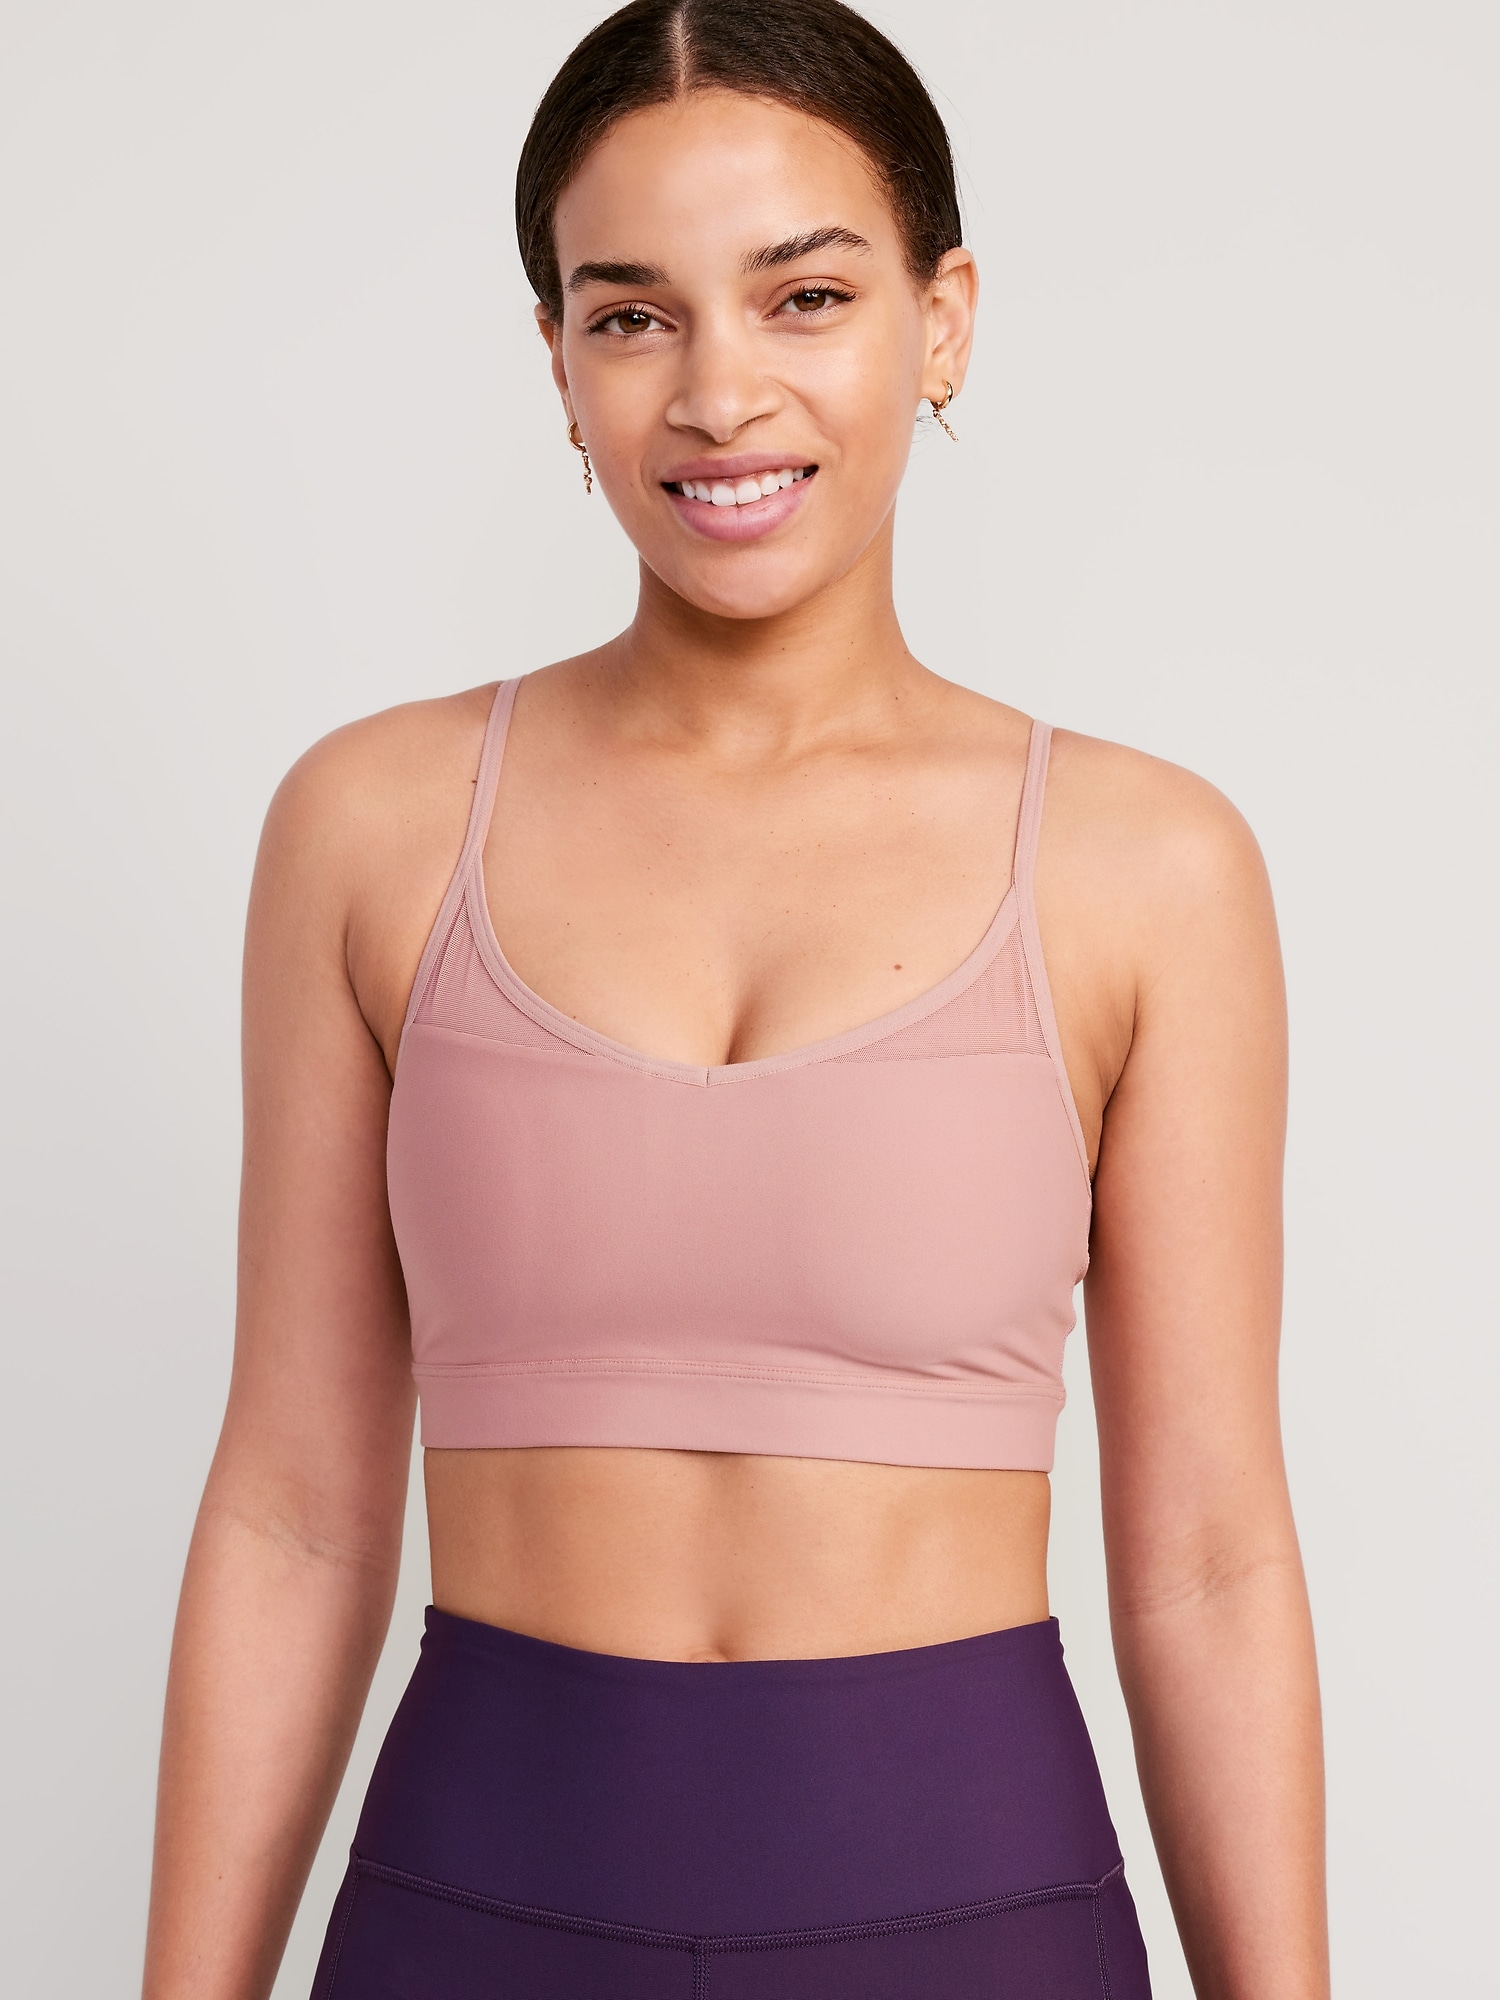 Womens Flow Y Back Sports Bra With Removable Cups, Light Support